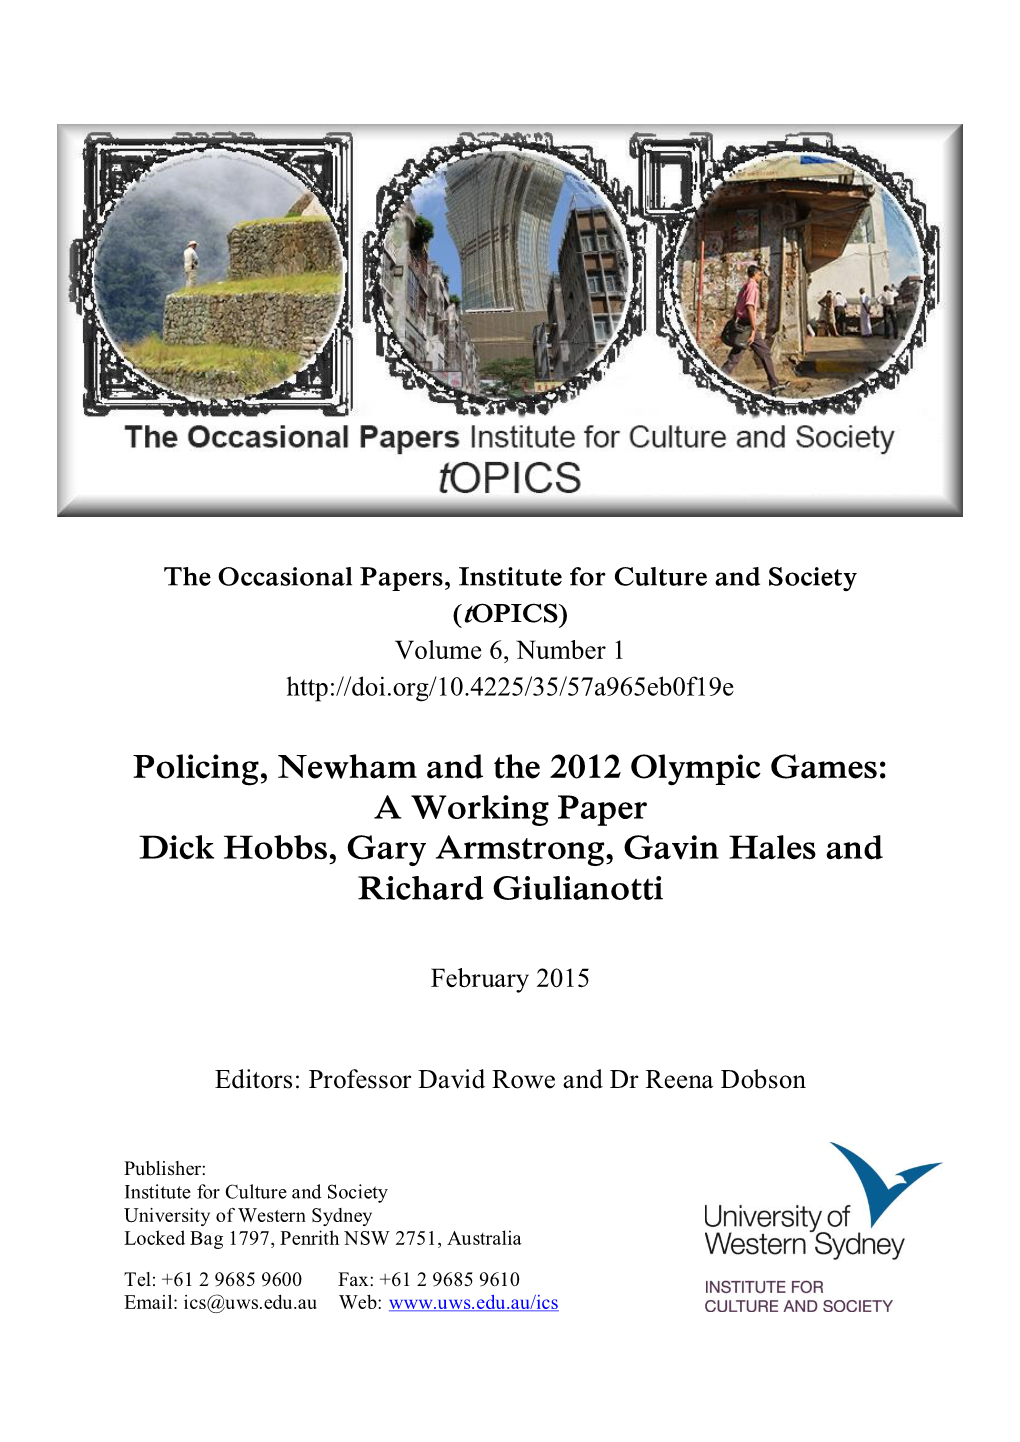 Policing, Newham and the 2012 Olympic Games: a Working Paper Dick Hobbs, Gary Armstrong, Gavin Hales and Richard Giulianotti